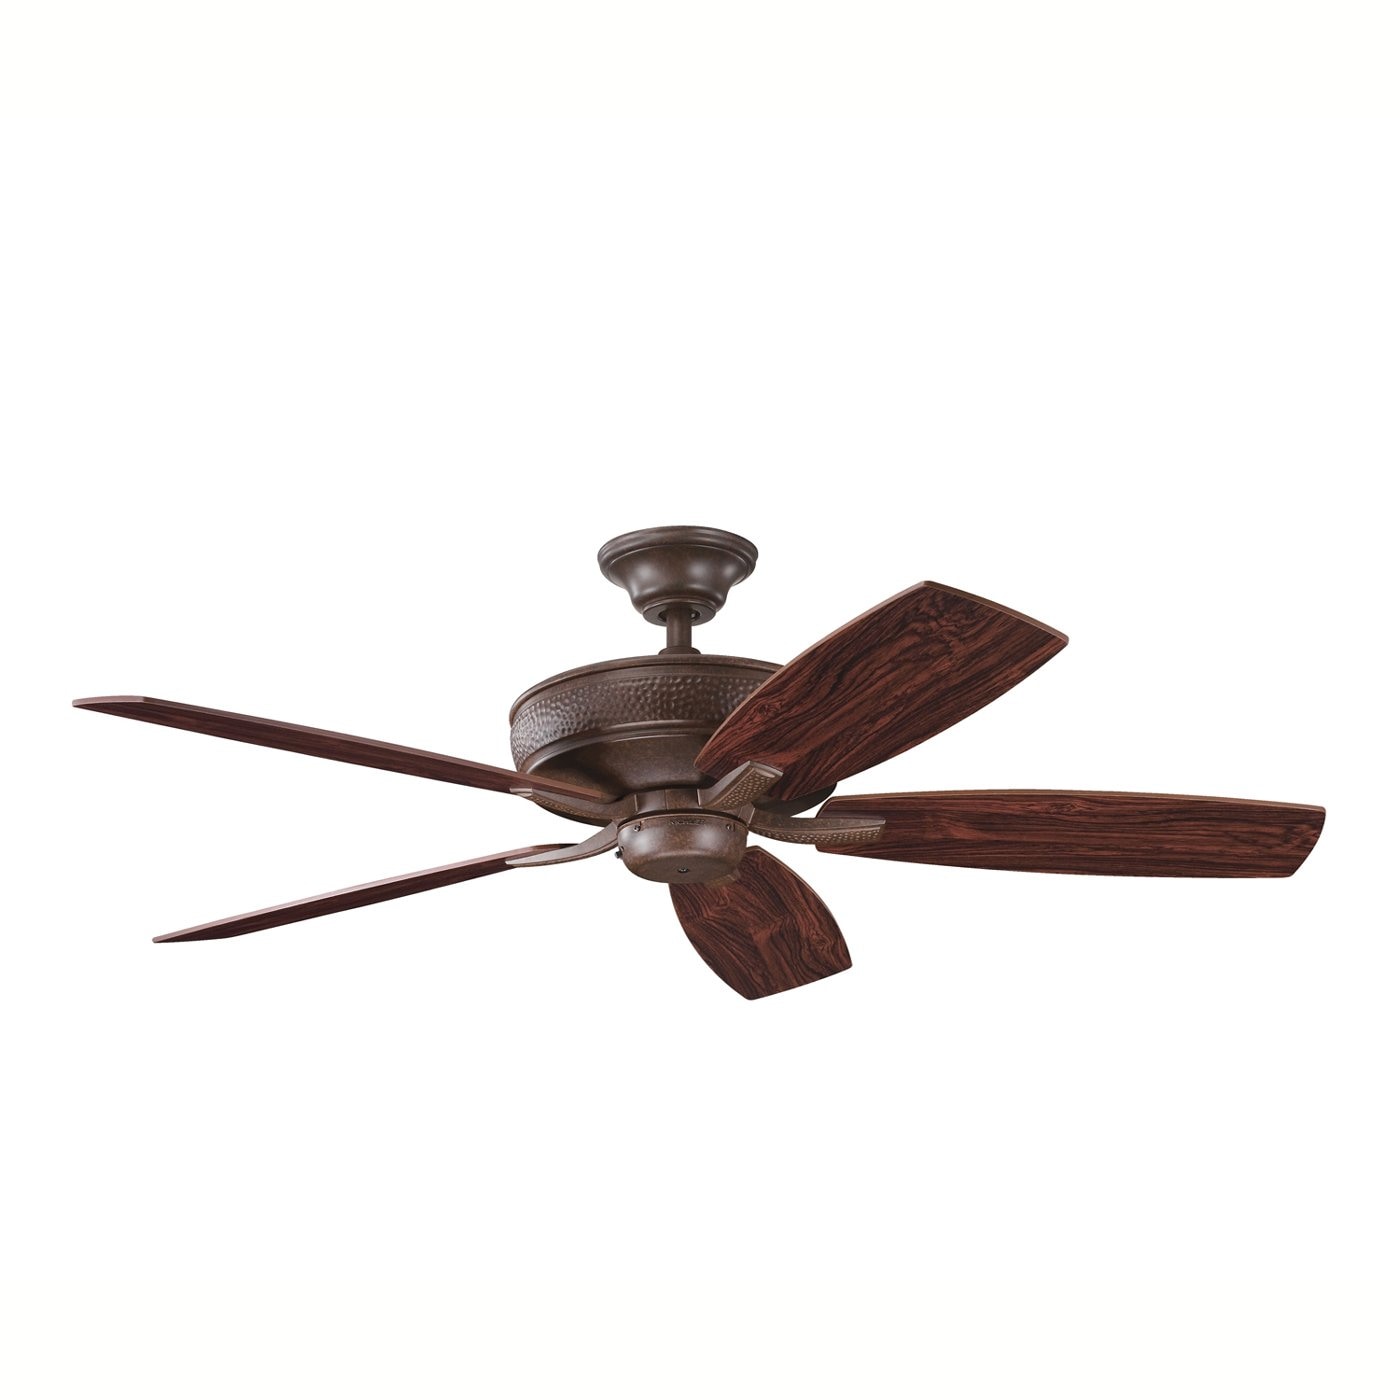 Kichler Bronze 52 inch Ceiling Fan with 3-light Kit With Leaf Blades $465 